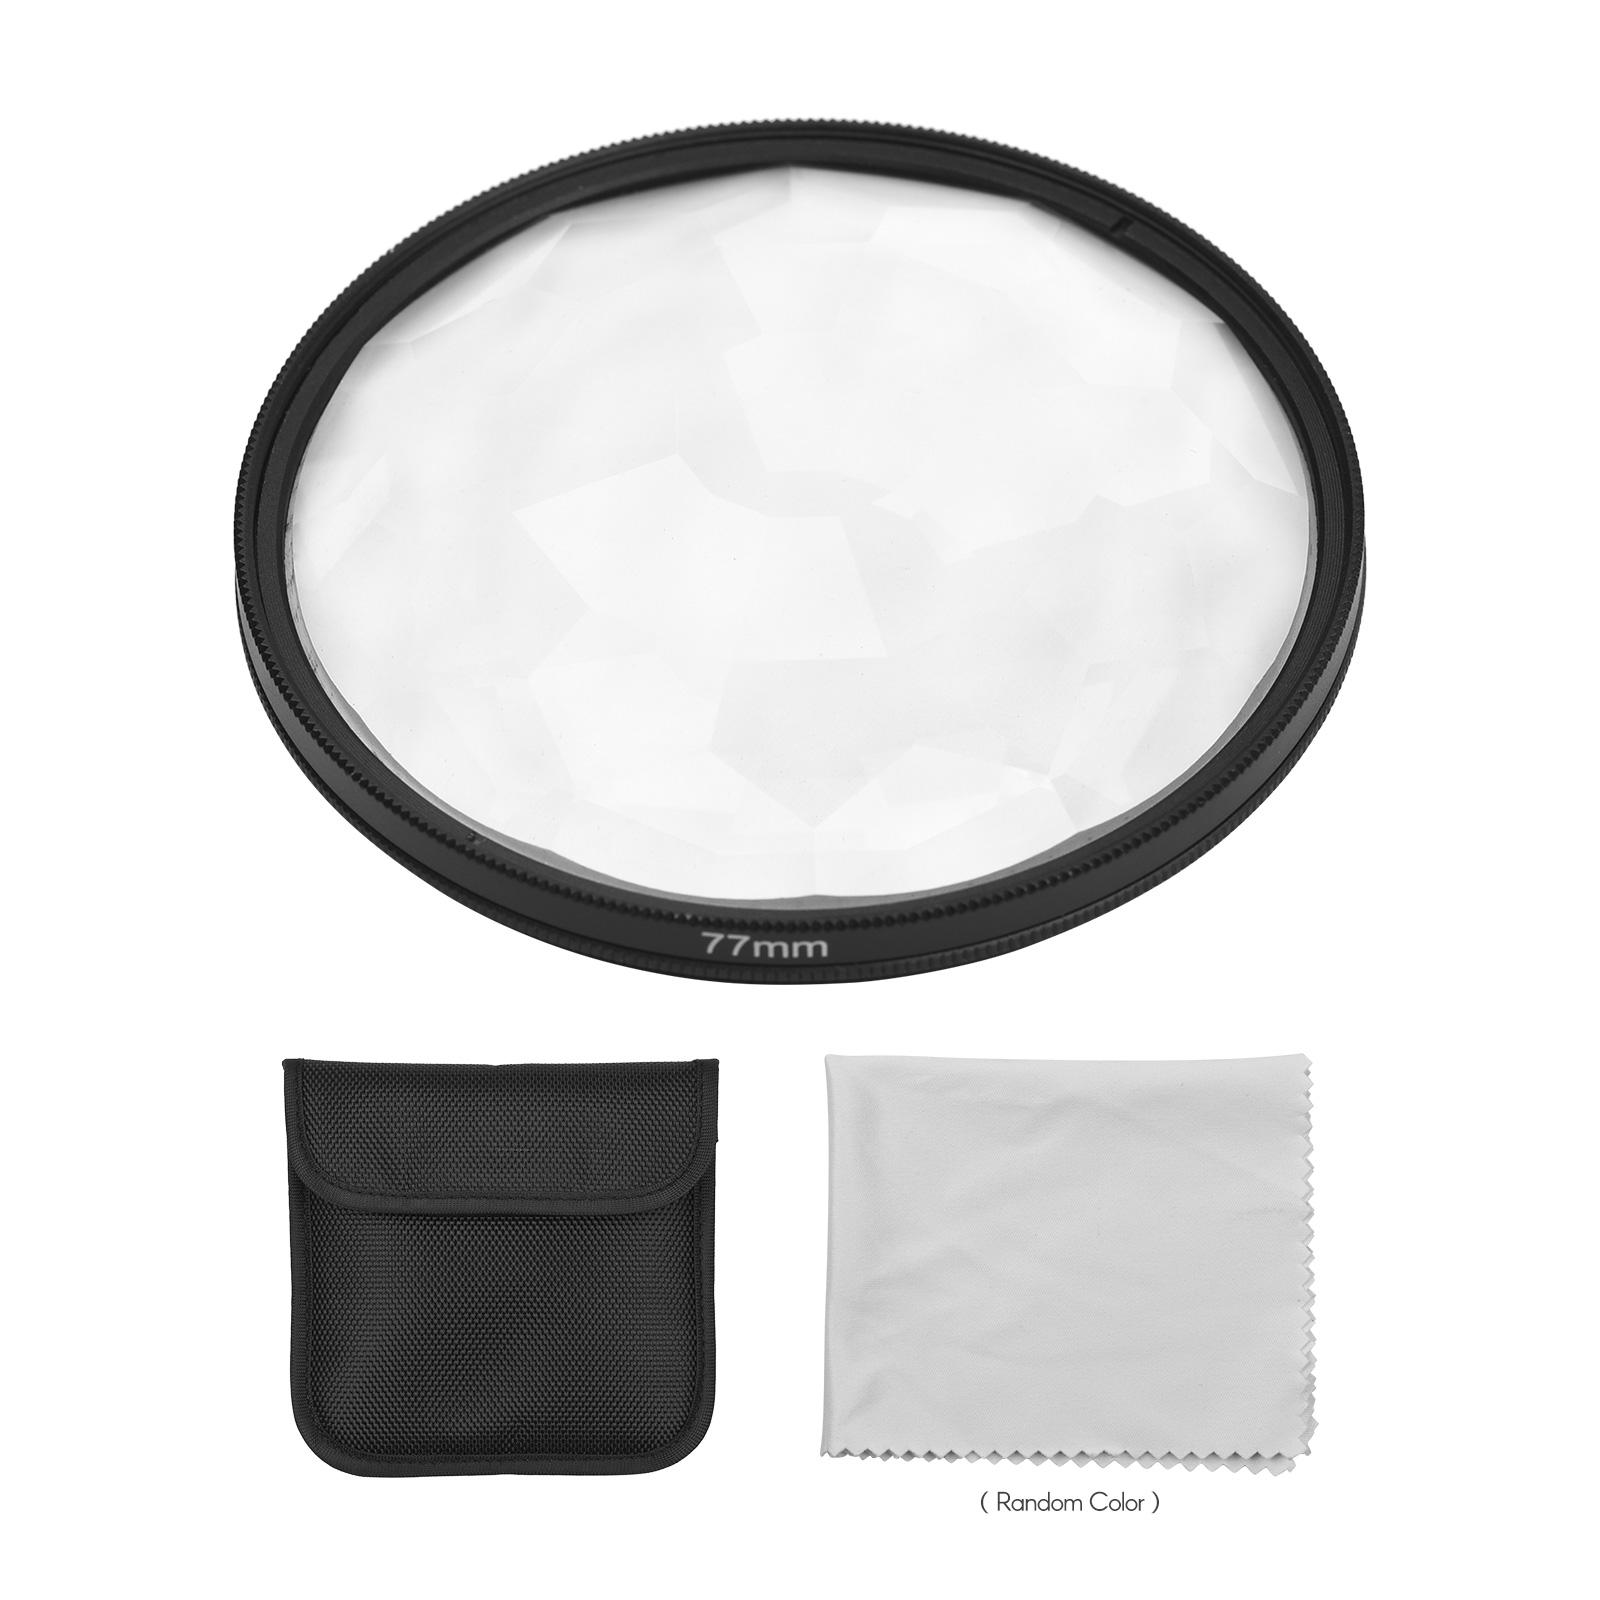 77mm Kaleidoscope Lens Filter Optical Glass Lens Filter Professional Photography Accessory for DSLR Camera